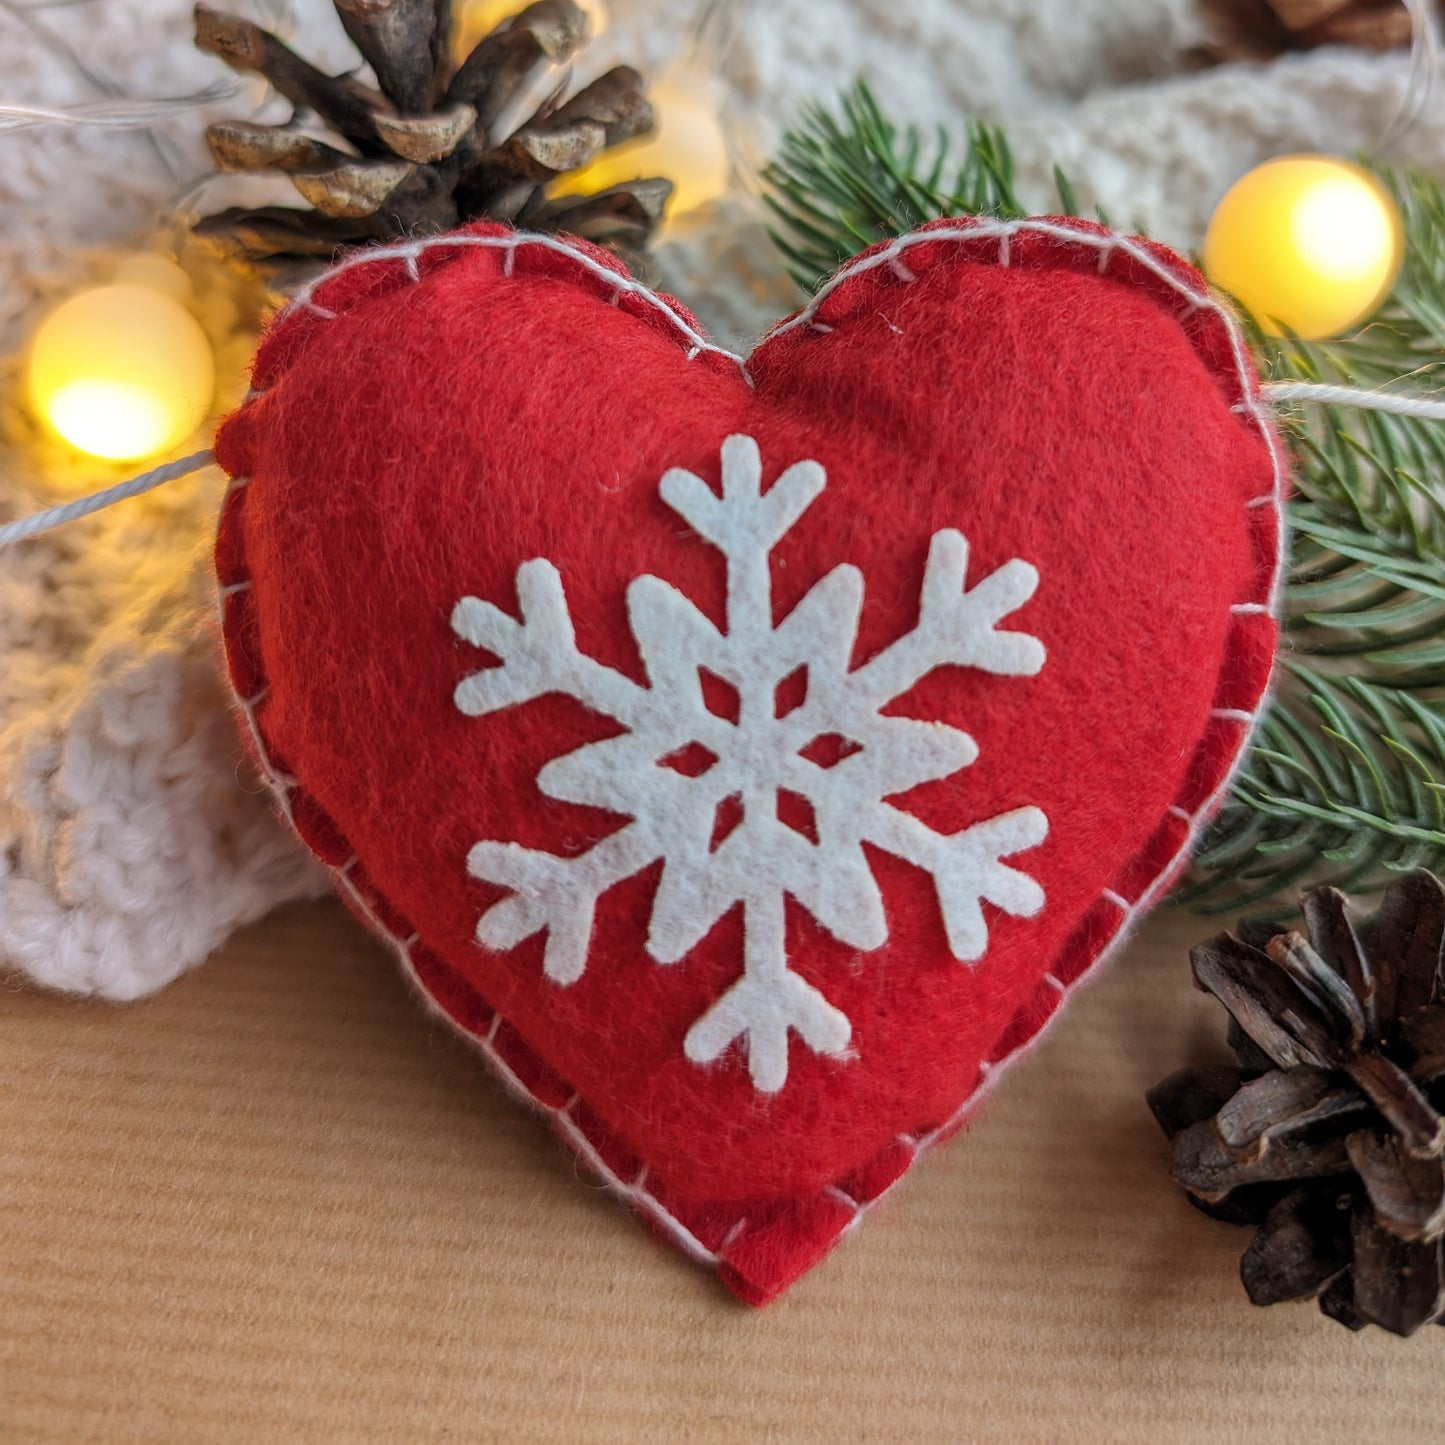 Red & White Snowflake Hearts Garland - Made of Felt - 120cm long